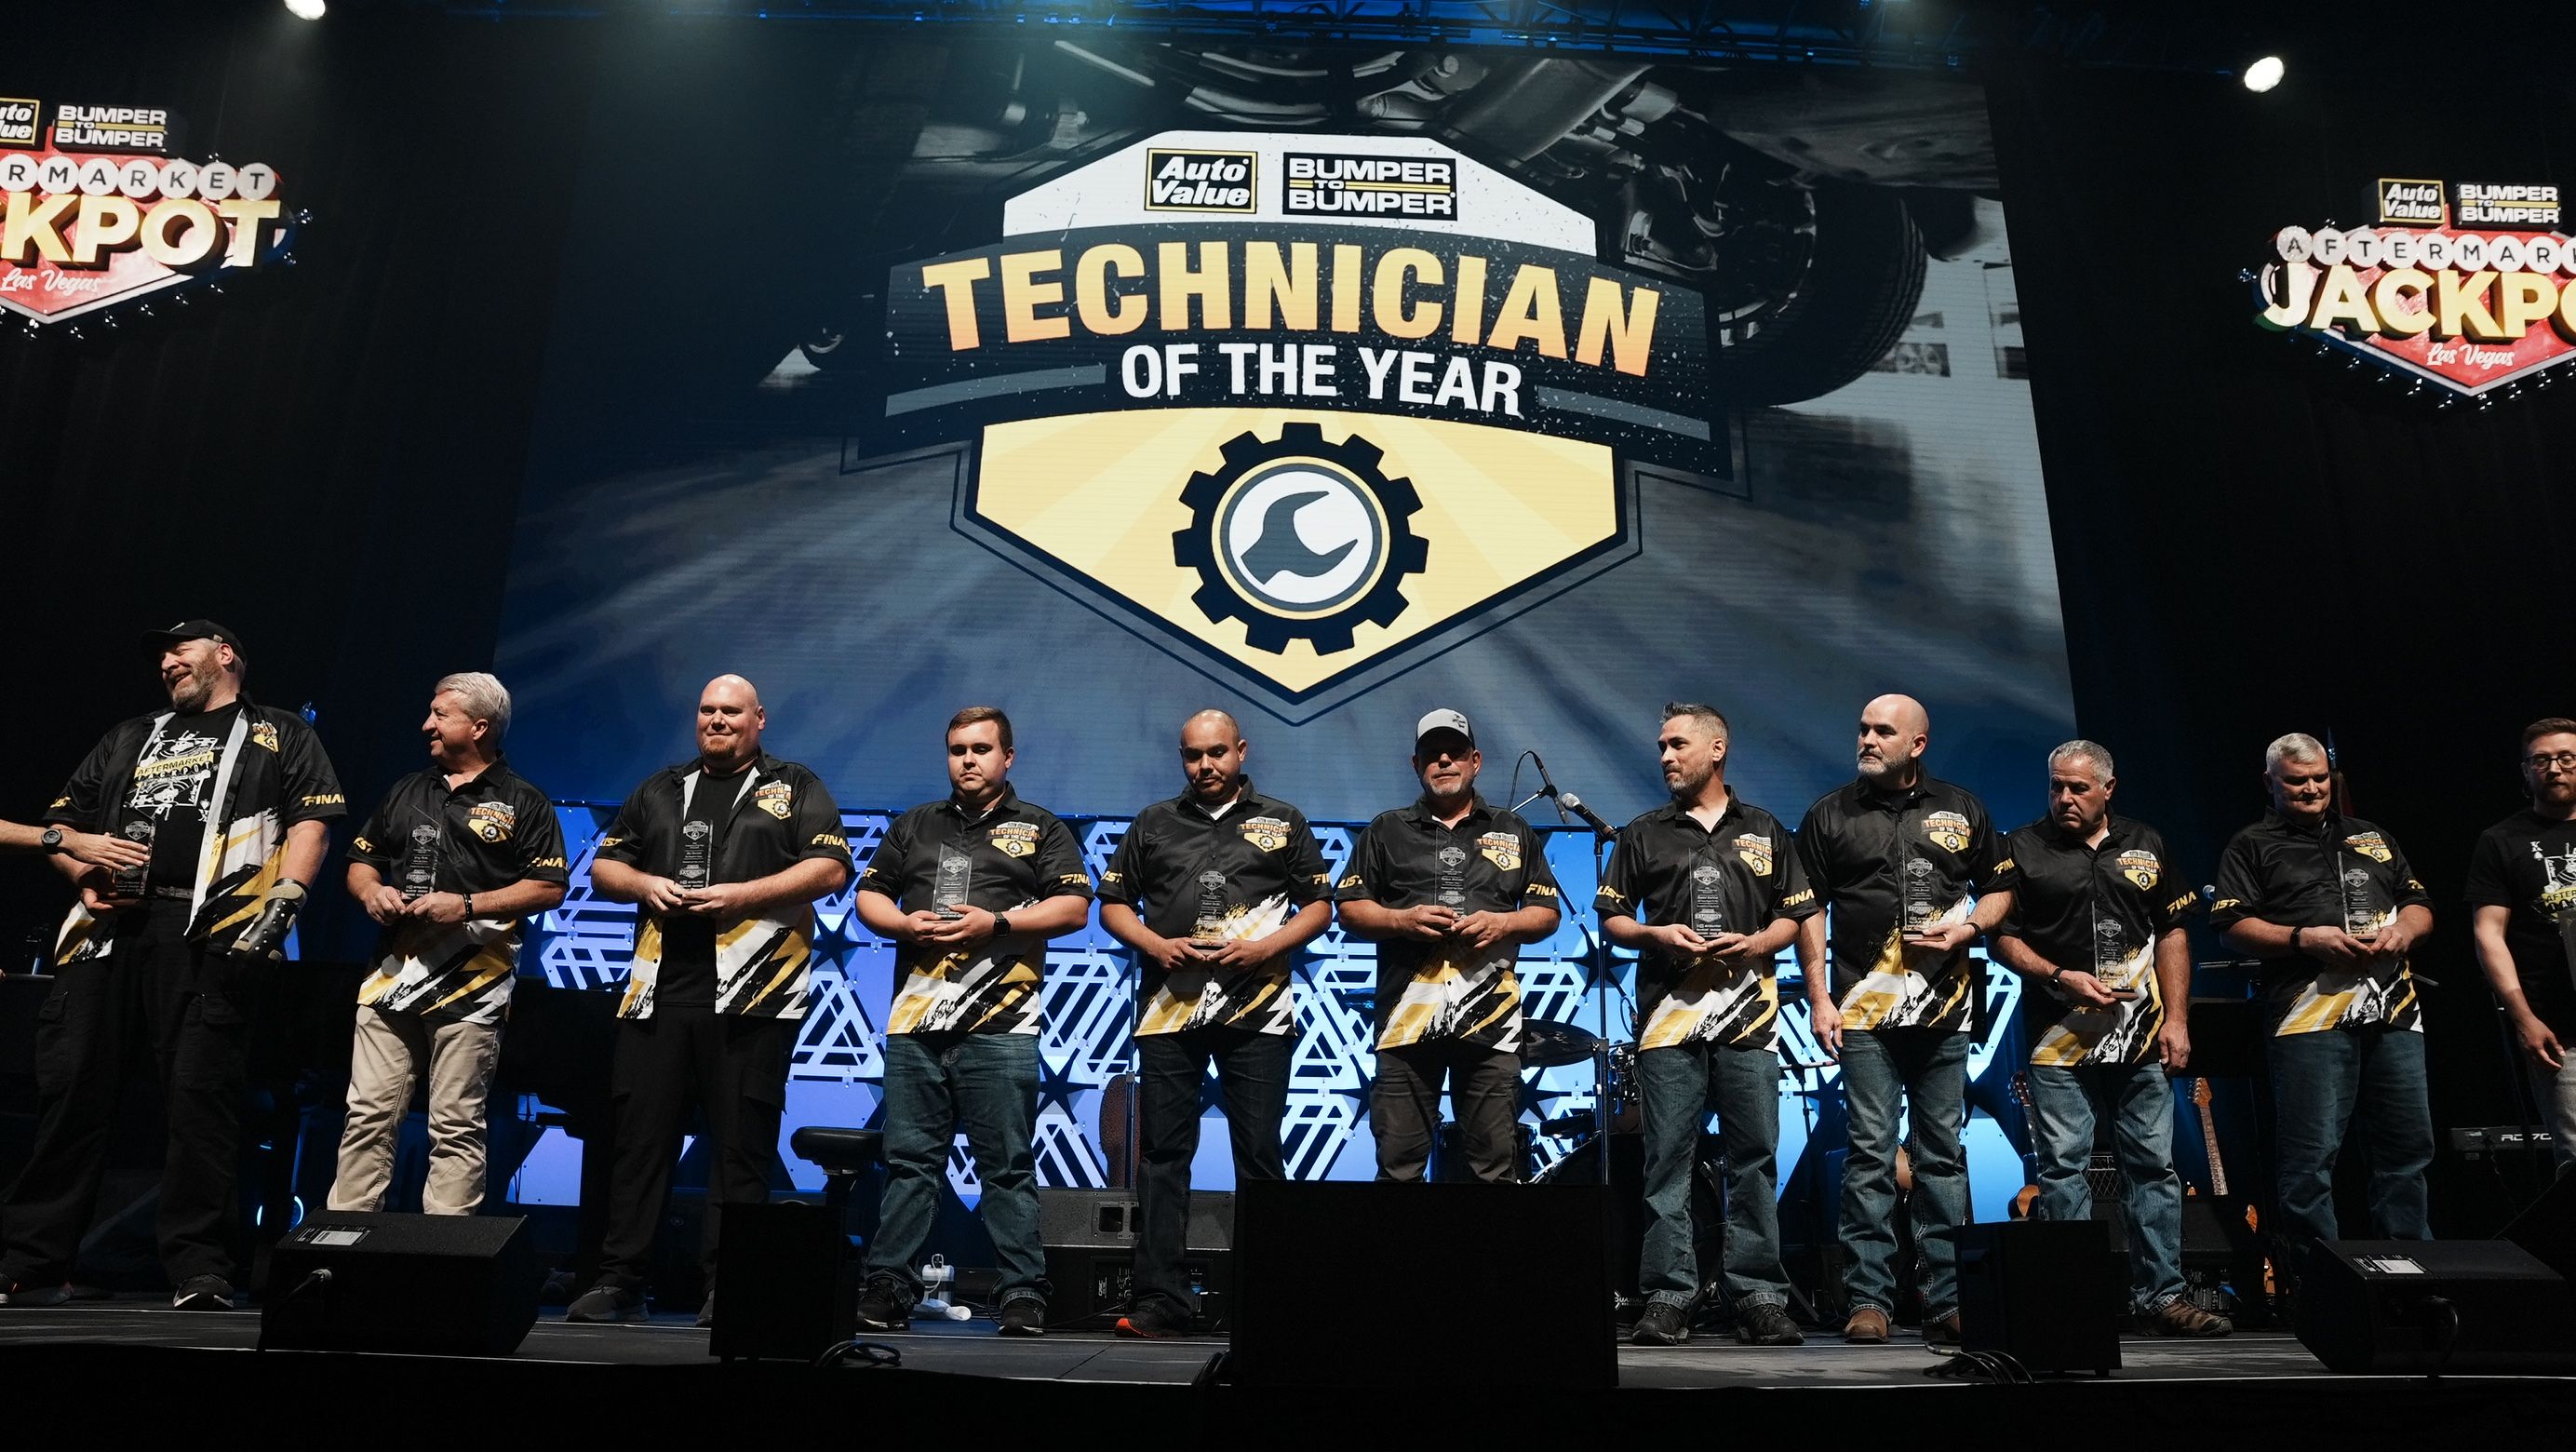 The Alliance convention named the top Auto Value Technician of the Year for the United States from eleven finalists all gathered for the event.  Auto Value Technician of the Year from Canada, Brent Mattern, from Mainline Fleet Service, and customer of Alliance member Auto Electric was also recognized.